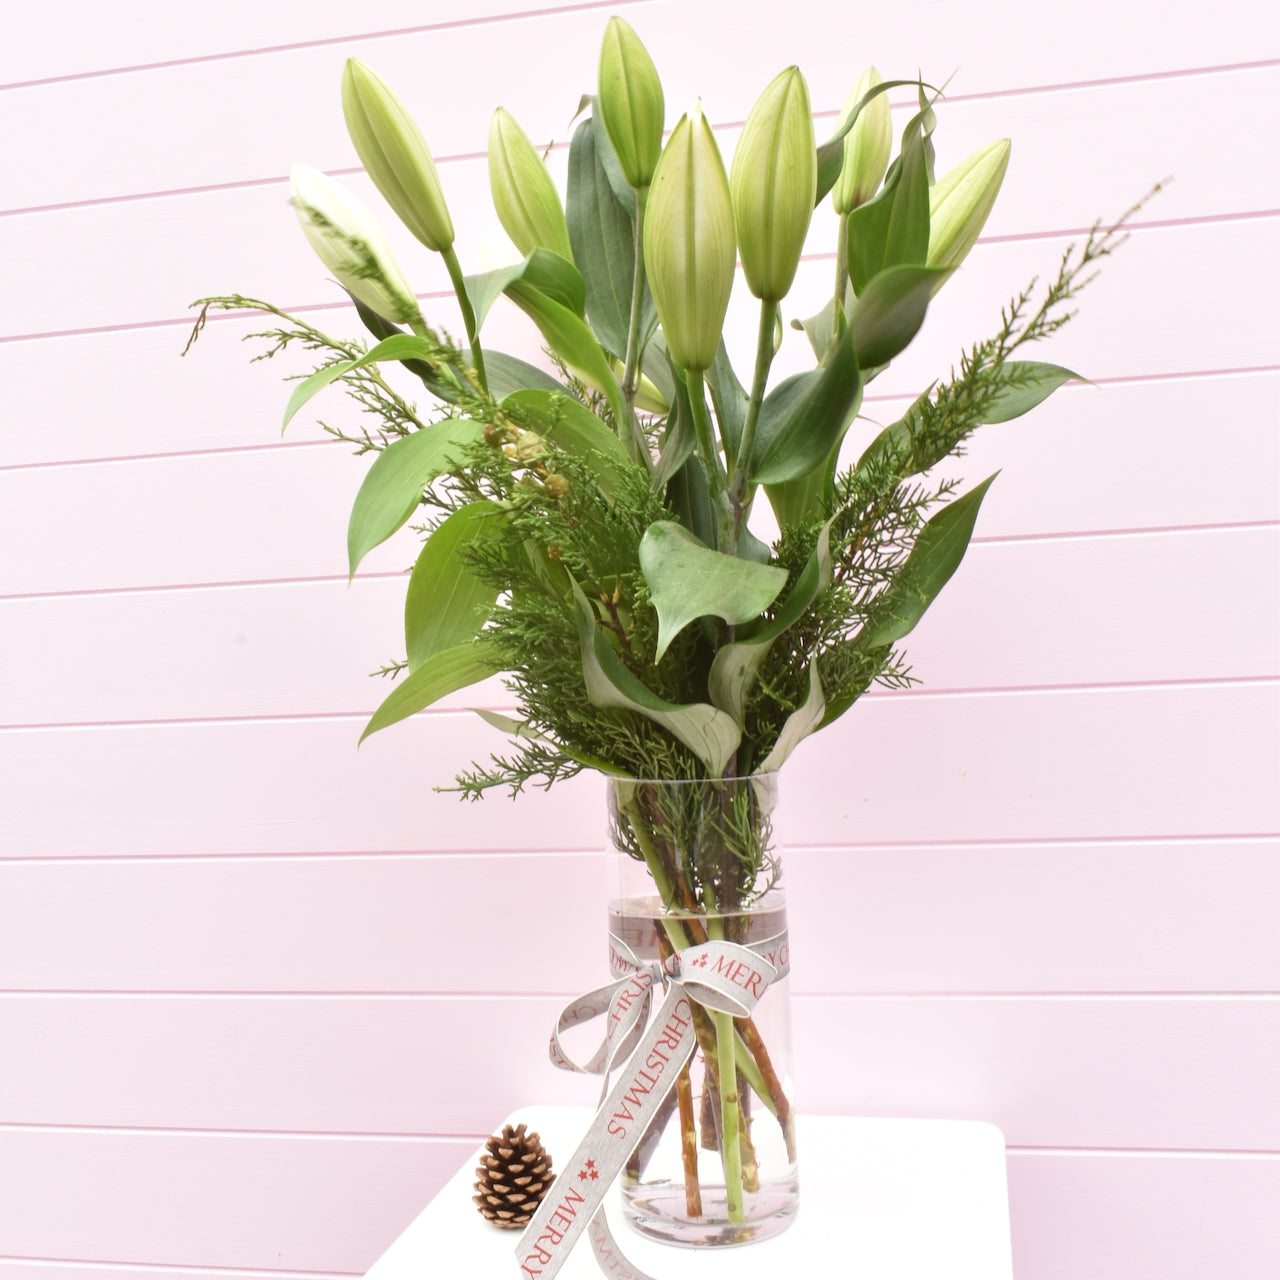 White Oriental Christmas lilies in a glass vase with Christmas foliage and Christmas ribbon